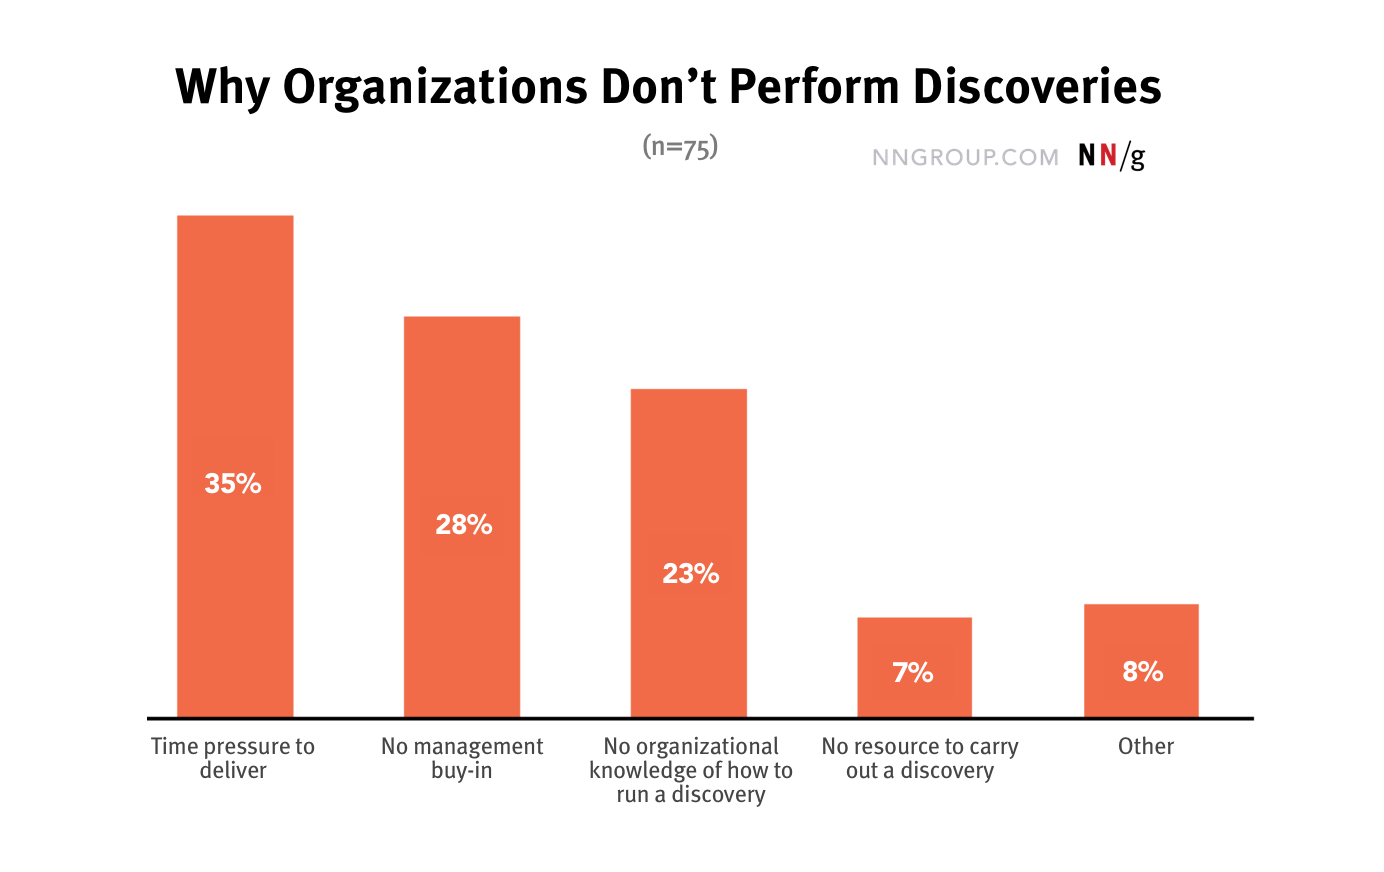 A bar chart shows the top reason given by 75 UX practitioners for why their organization does not carry out discovery phases in any of their projects. 35% of the respondents reported it was due to time pressure to deliver. 28% reported lack of management buy-in being the top reason. 23% reported the top reason being a lack of knowledge in the organization on how to carry them out. Only 7% of respondents said the top reason was a lack of resource. 8% said it was another reason not listed.